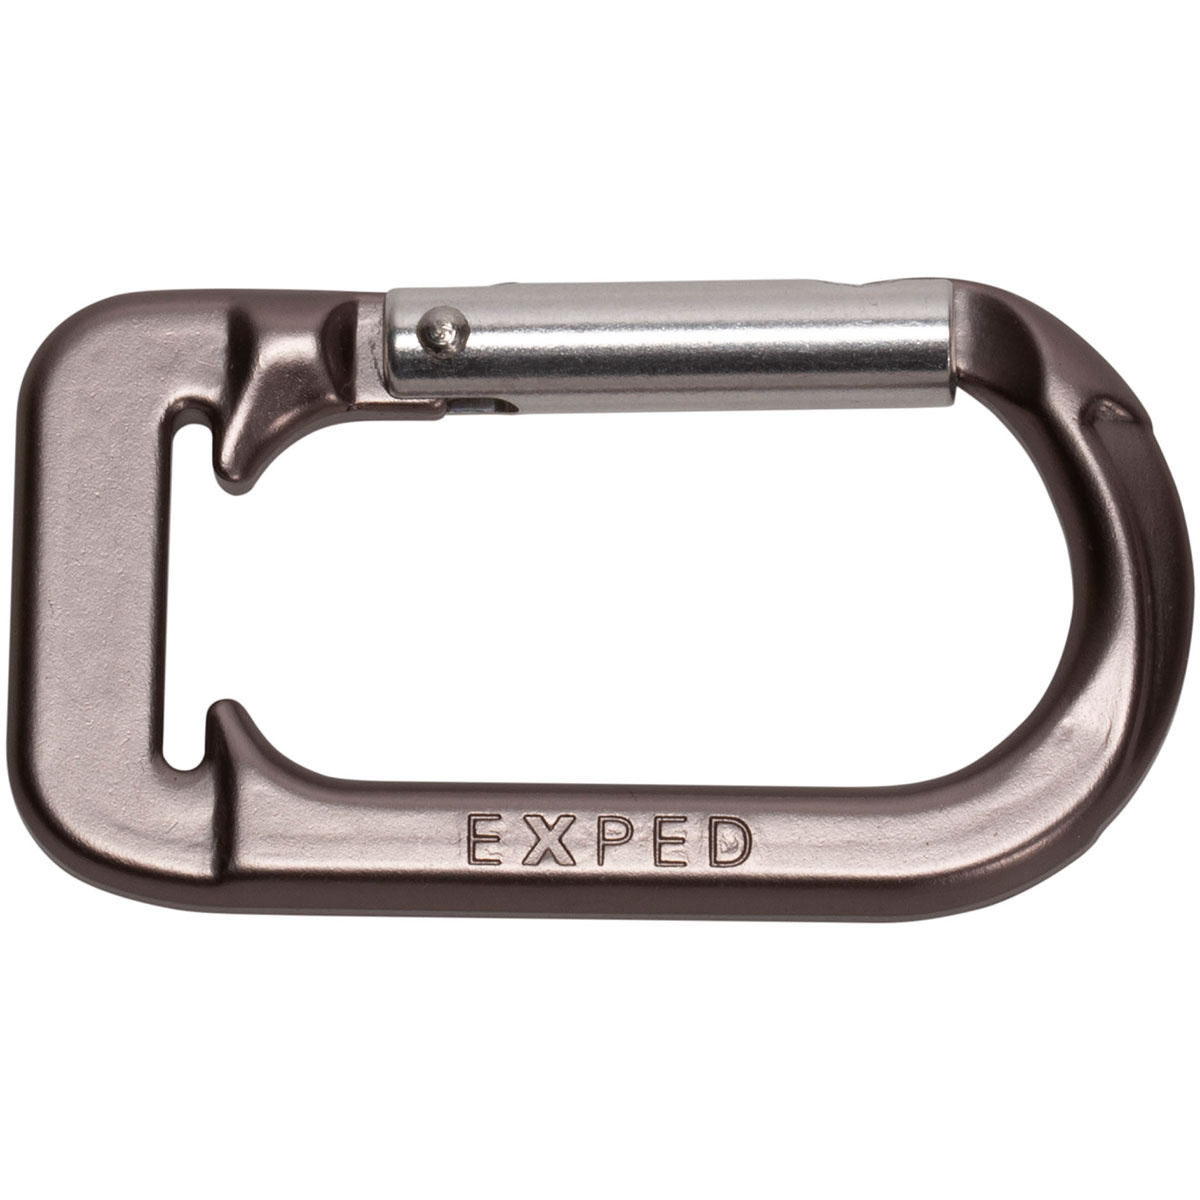 Exped Pack Accessory Karabiner von Exped